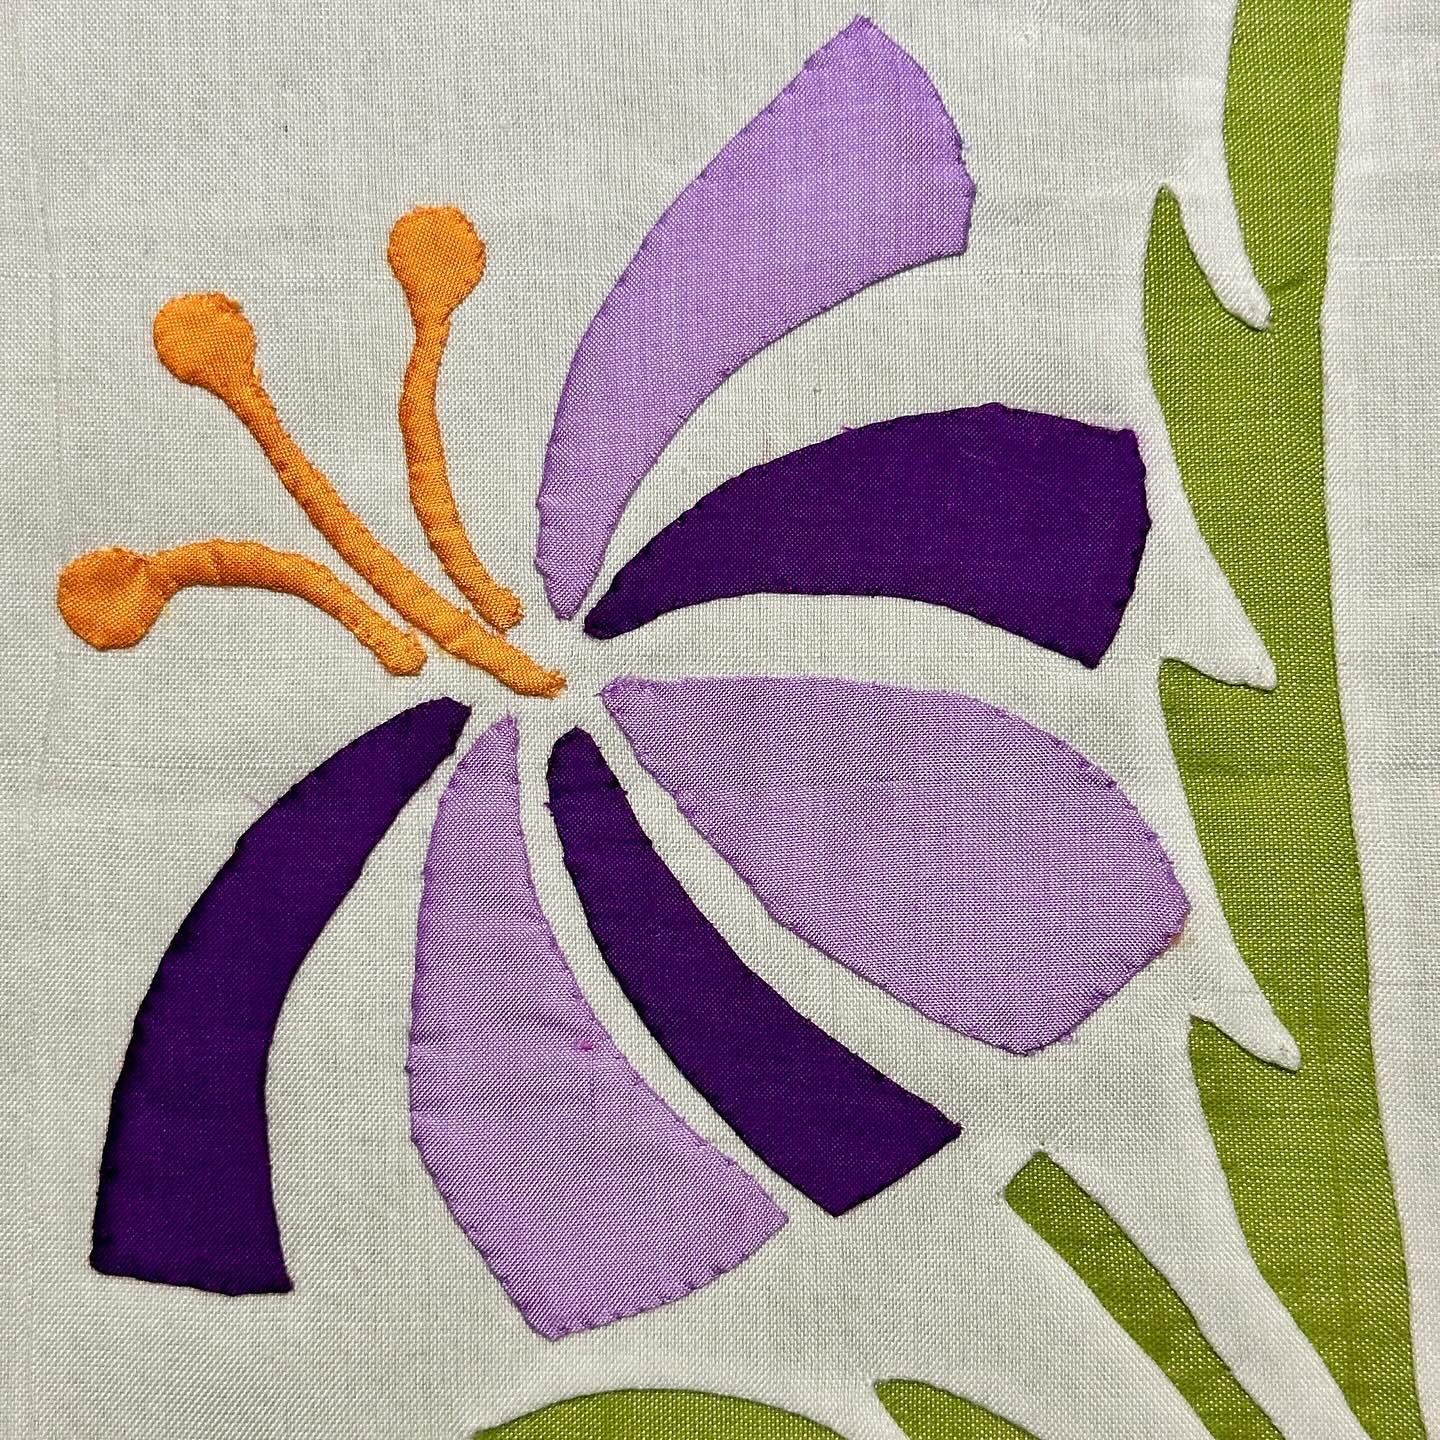 Dimensions in Appliqu&eacute; at @aqsonline QuiltWeek Paducah next week.  More ways in process : mixing fibers- Thai silk with Burma silk from @spiritoftheartisan , silk with velvet hand embroidered on; silk with wool hand embroidered on; wool with v